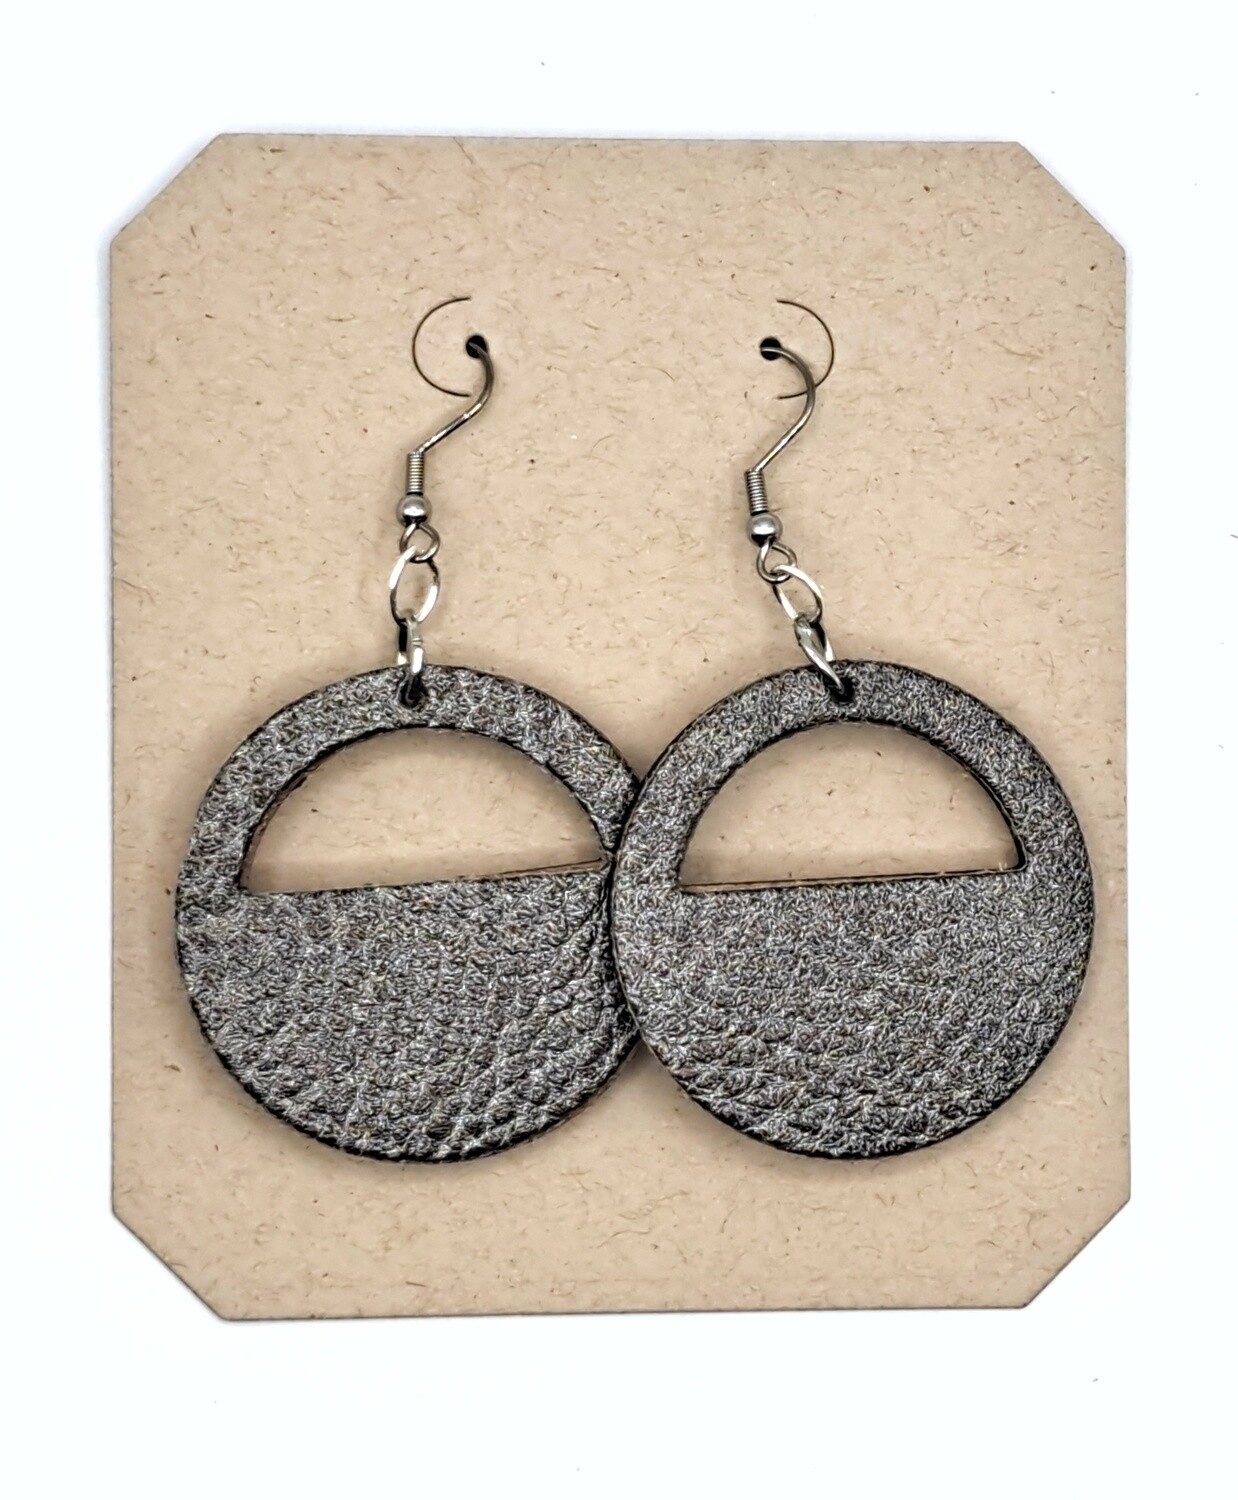 Handmade Faux Leather Wooden Circular Shaped Earrings